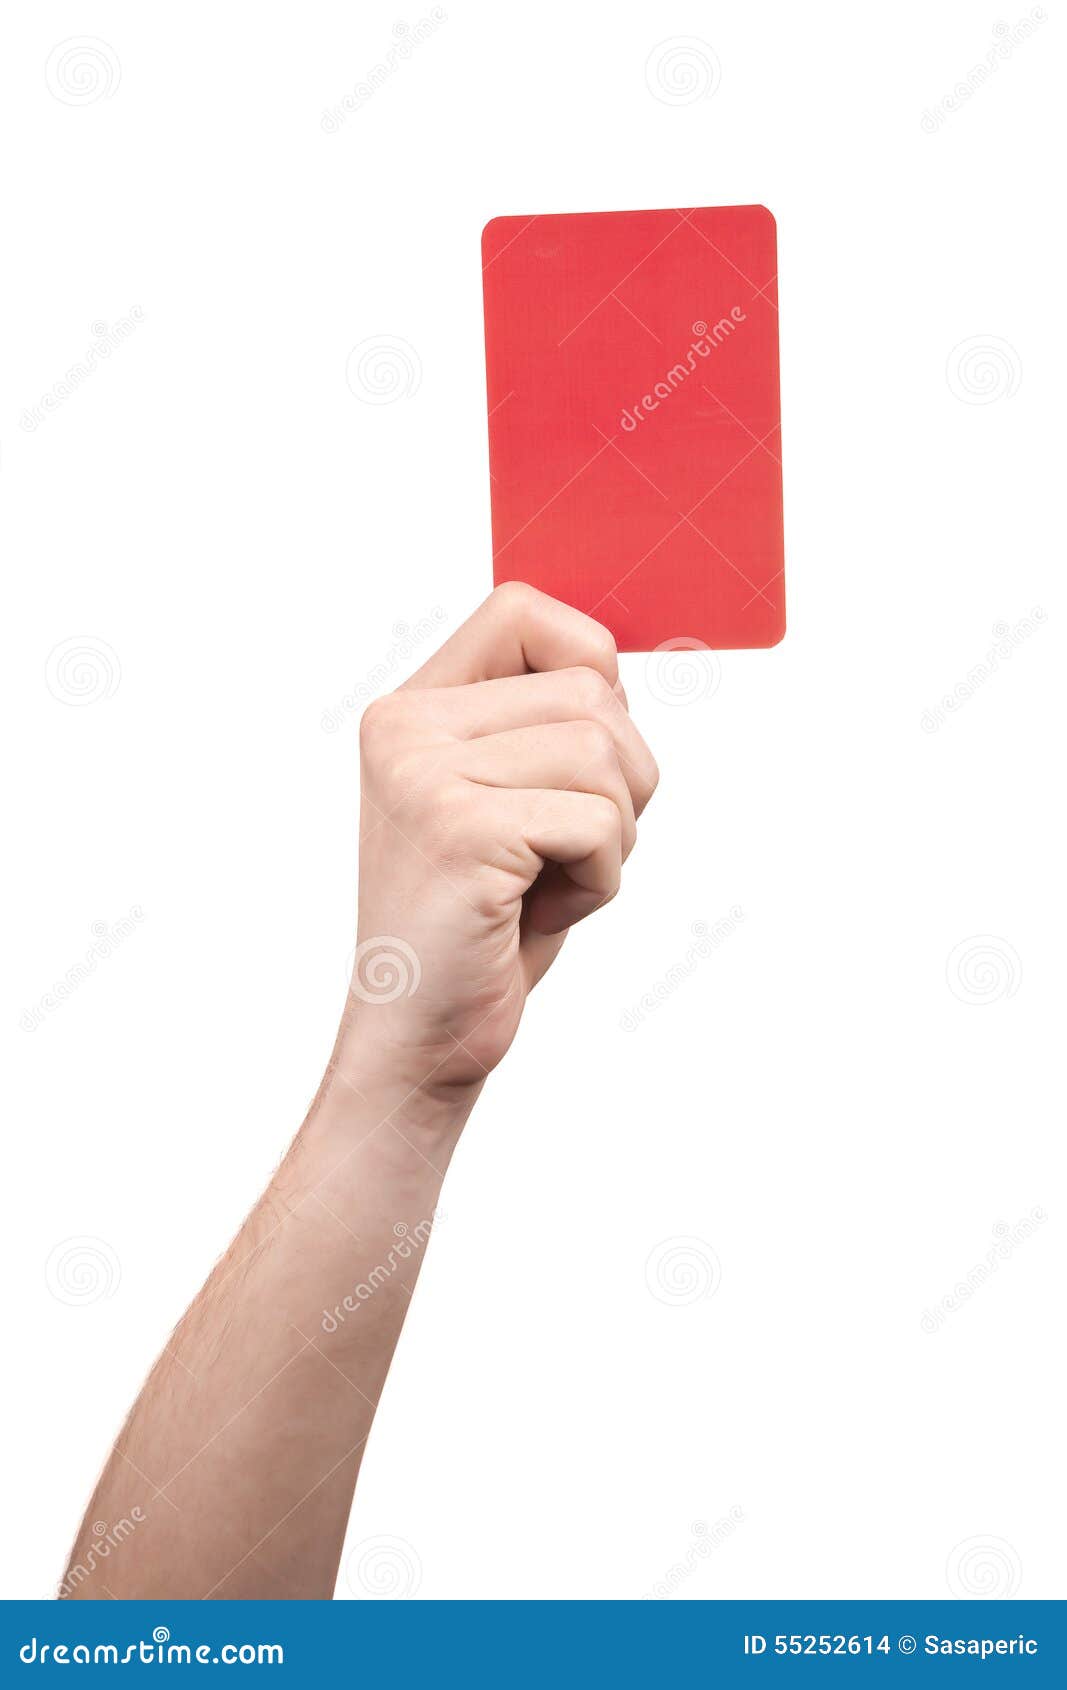 https://thumbs.dreamstime.com/z/soccer-referee-hand-holding-red-card-isolated-white-55252614.jpg